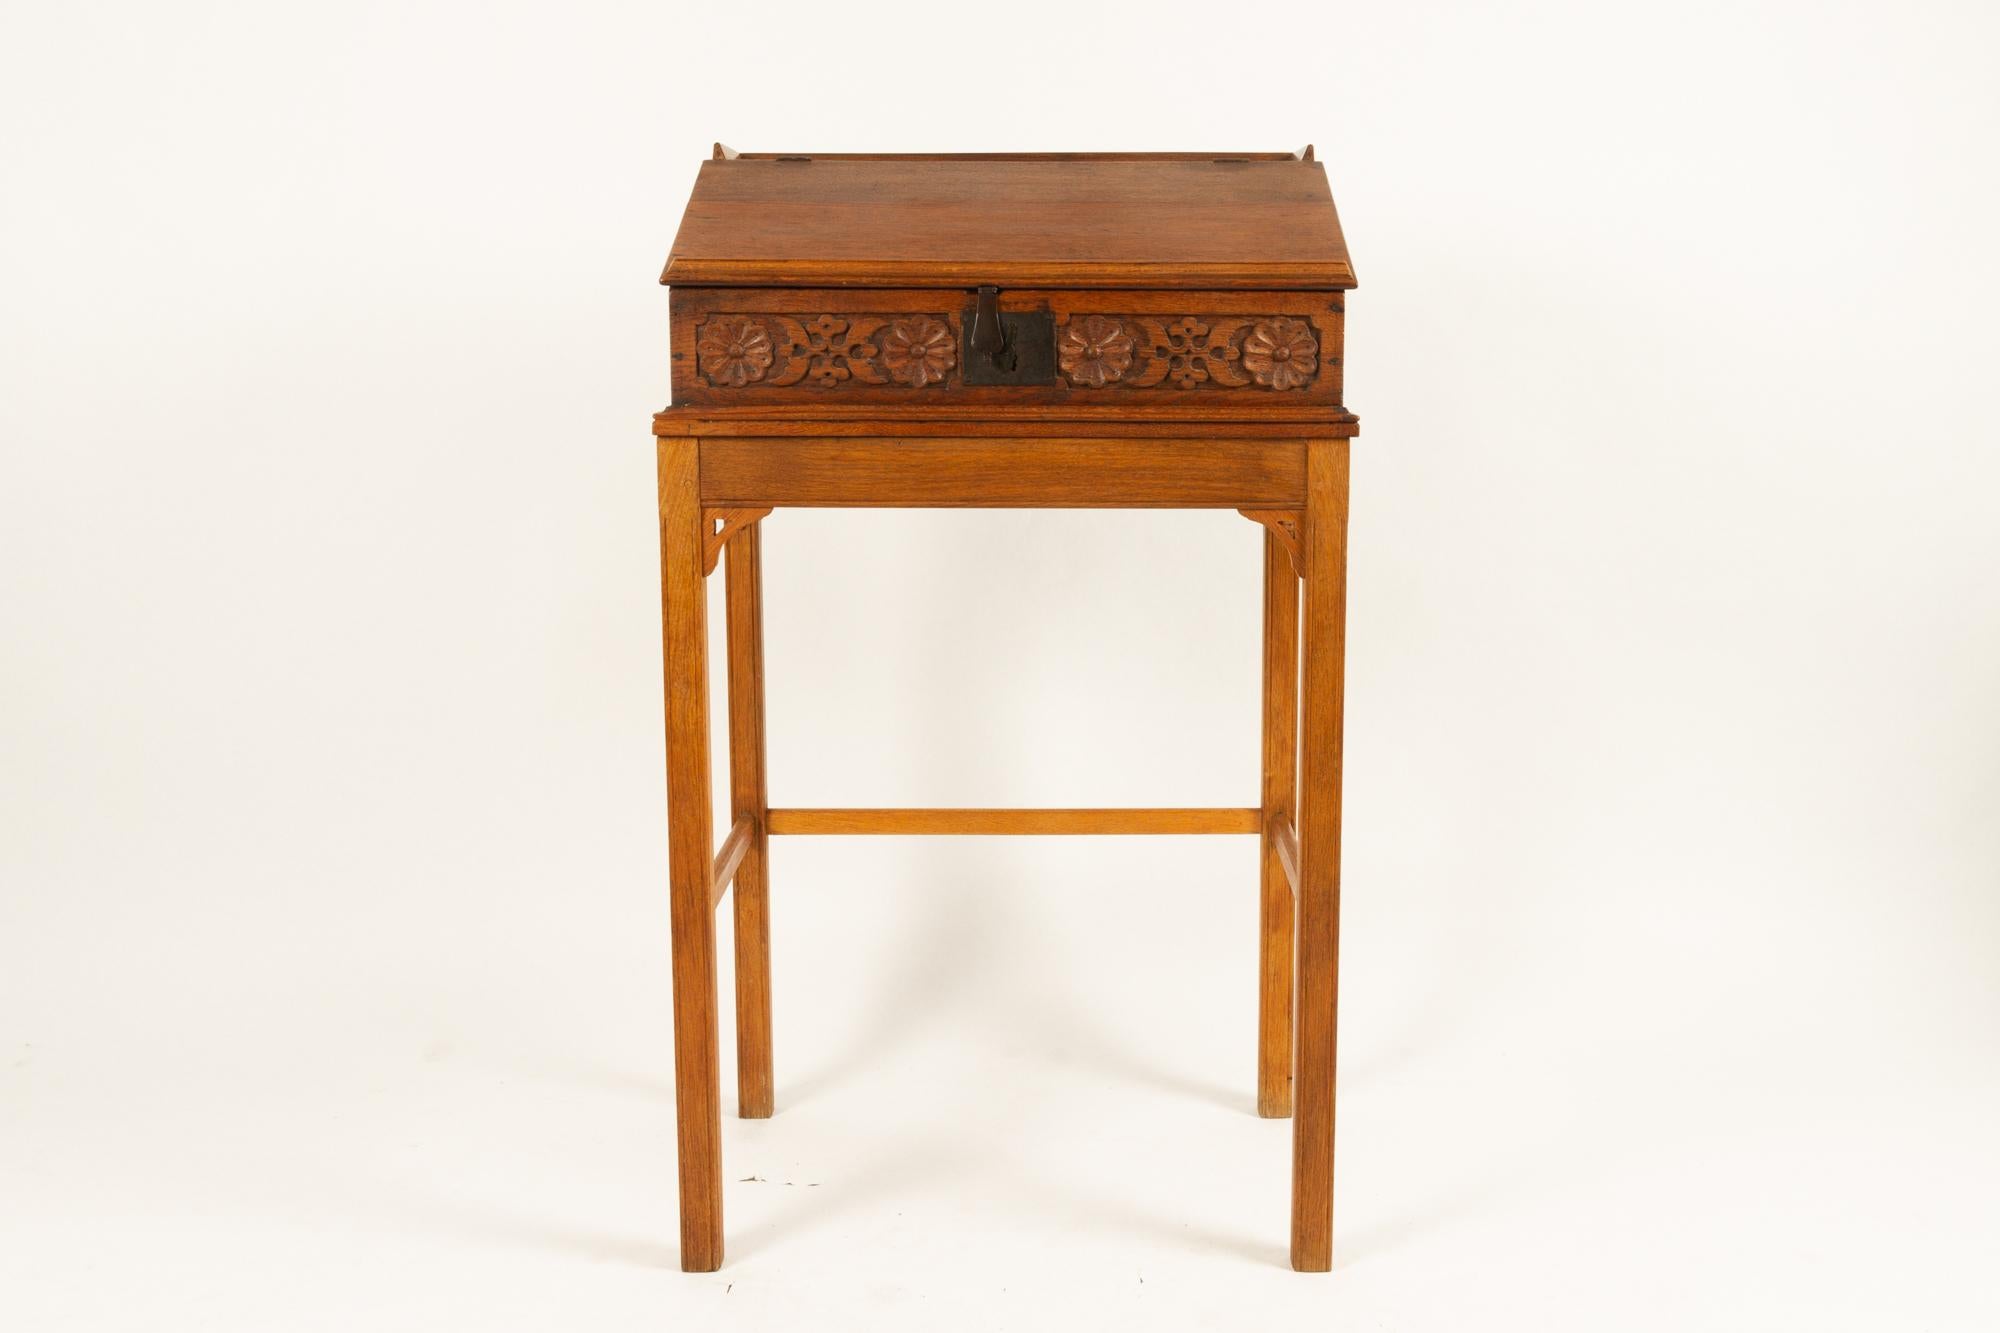 Antique 18th century oak writing desk.
Top with sloped top. Three small drawers inside. Original lock and fittings.
Base is later, probably 19th century.
Overall very good condition for its age. Fully functional. Cleaned and polished. Ready for